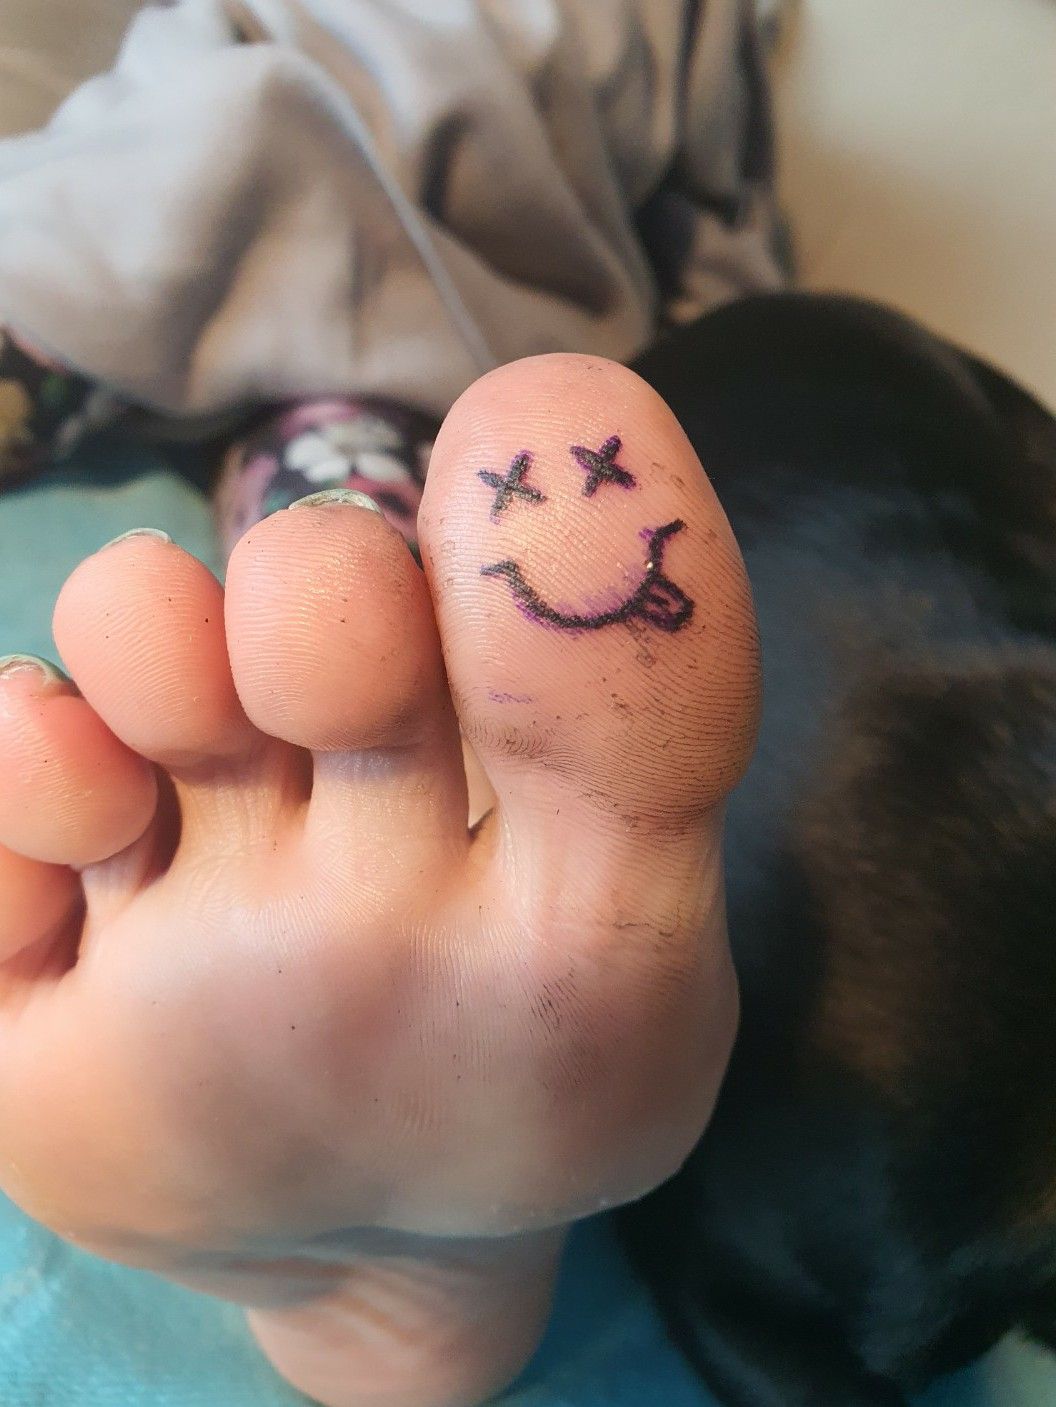 Couples Matching Marriage Toe Tag Tattoos Are Creeping People Out   CafeMomcom